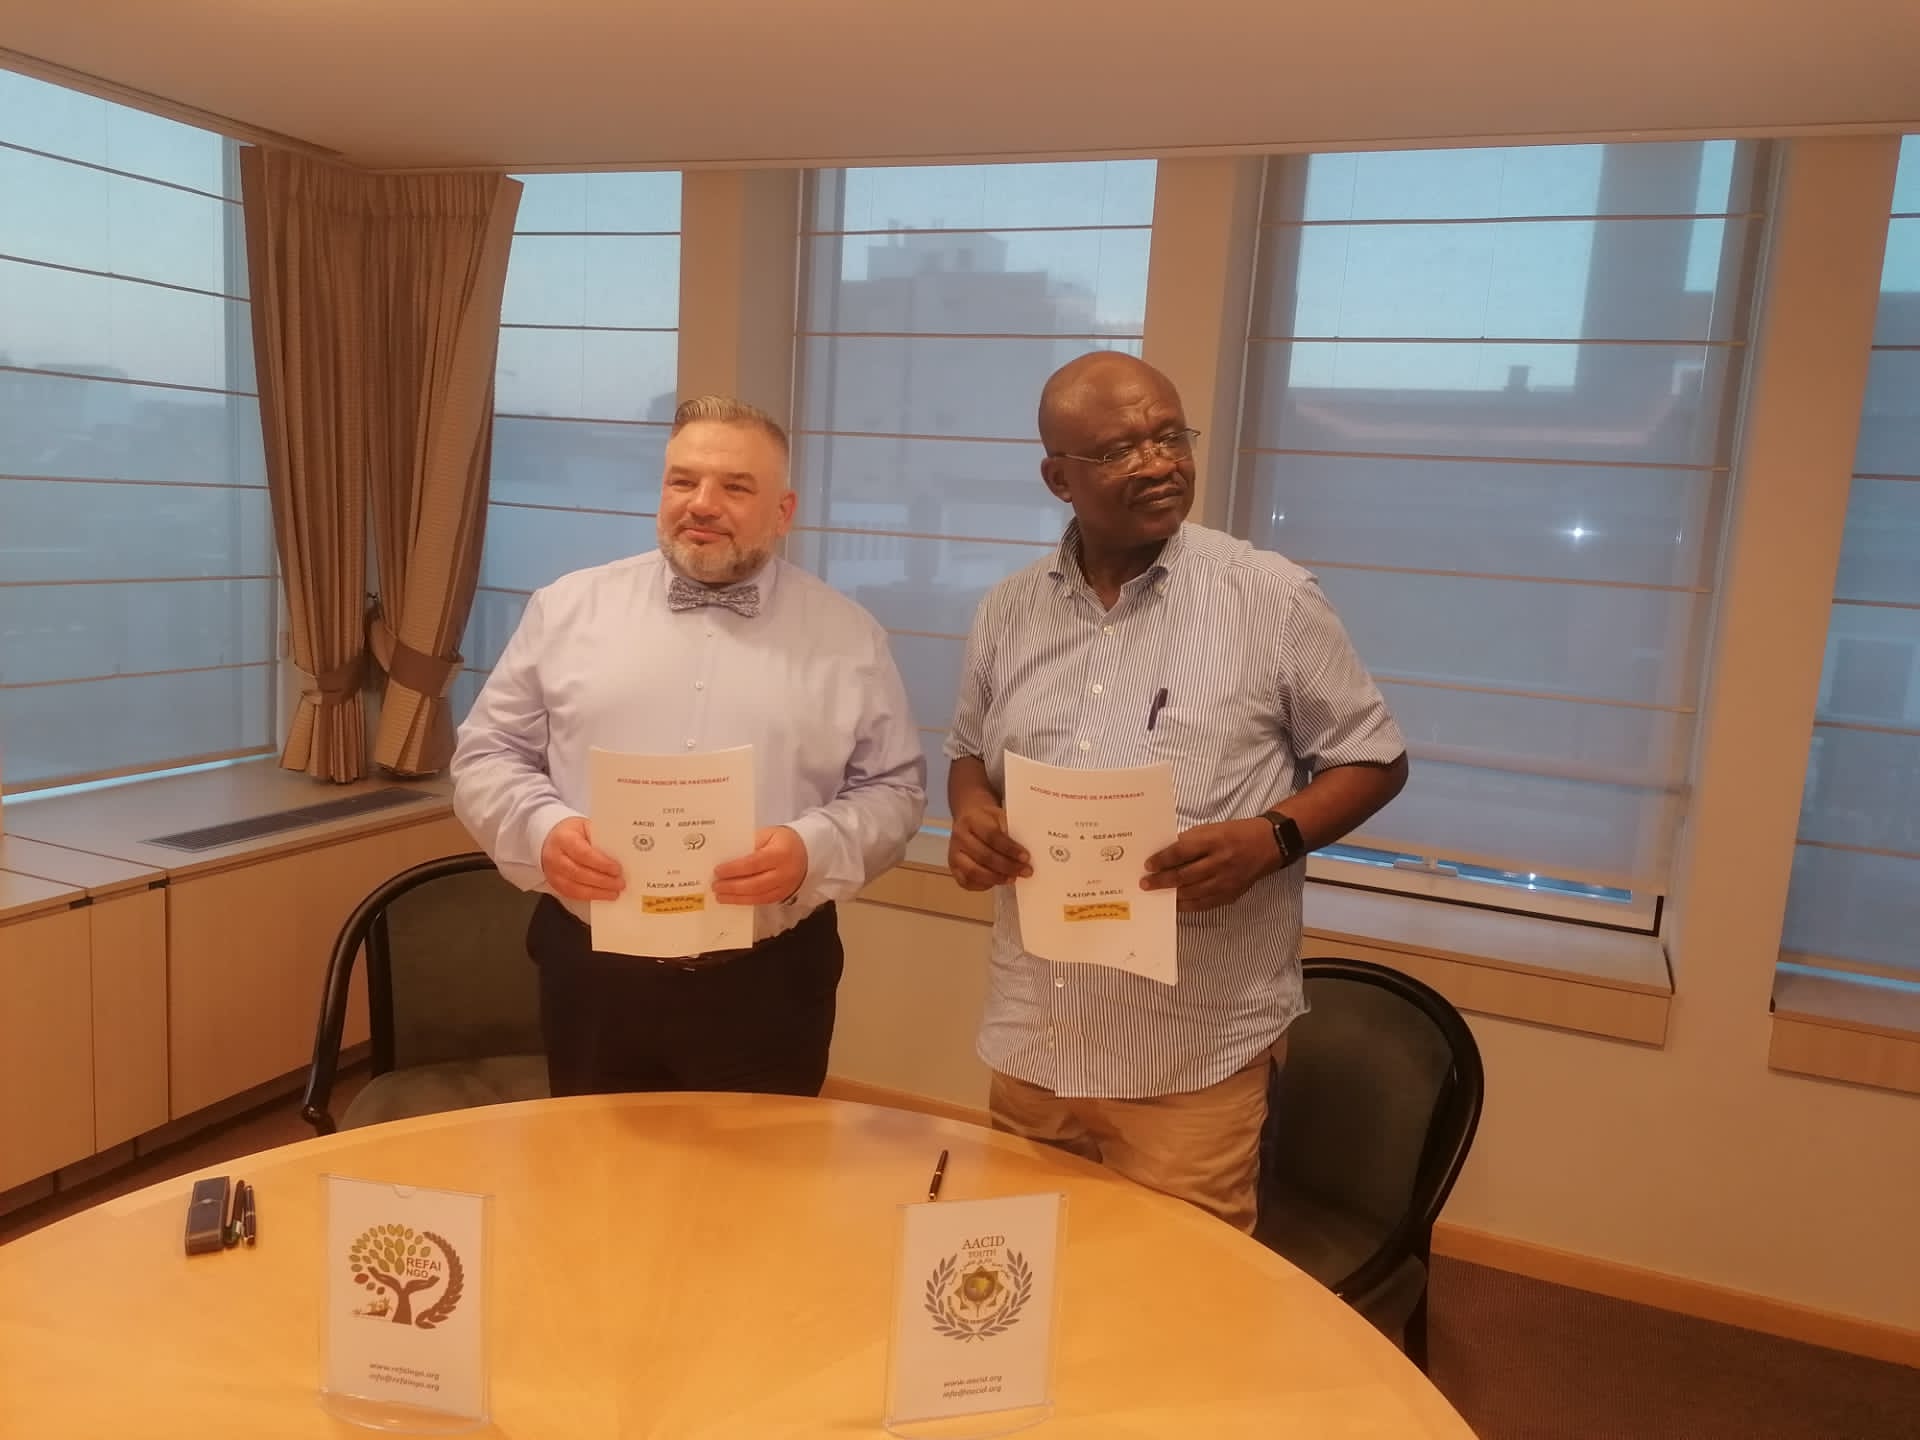 18 of June 2021 signing the Partnership Agreement for Gold Mine in DRC